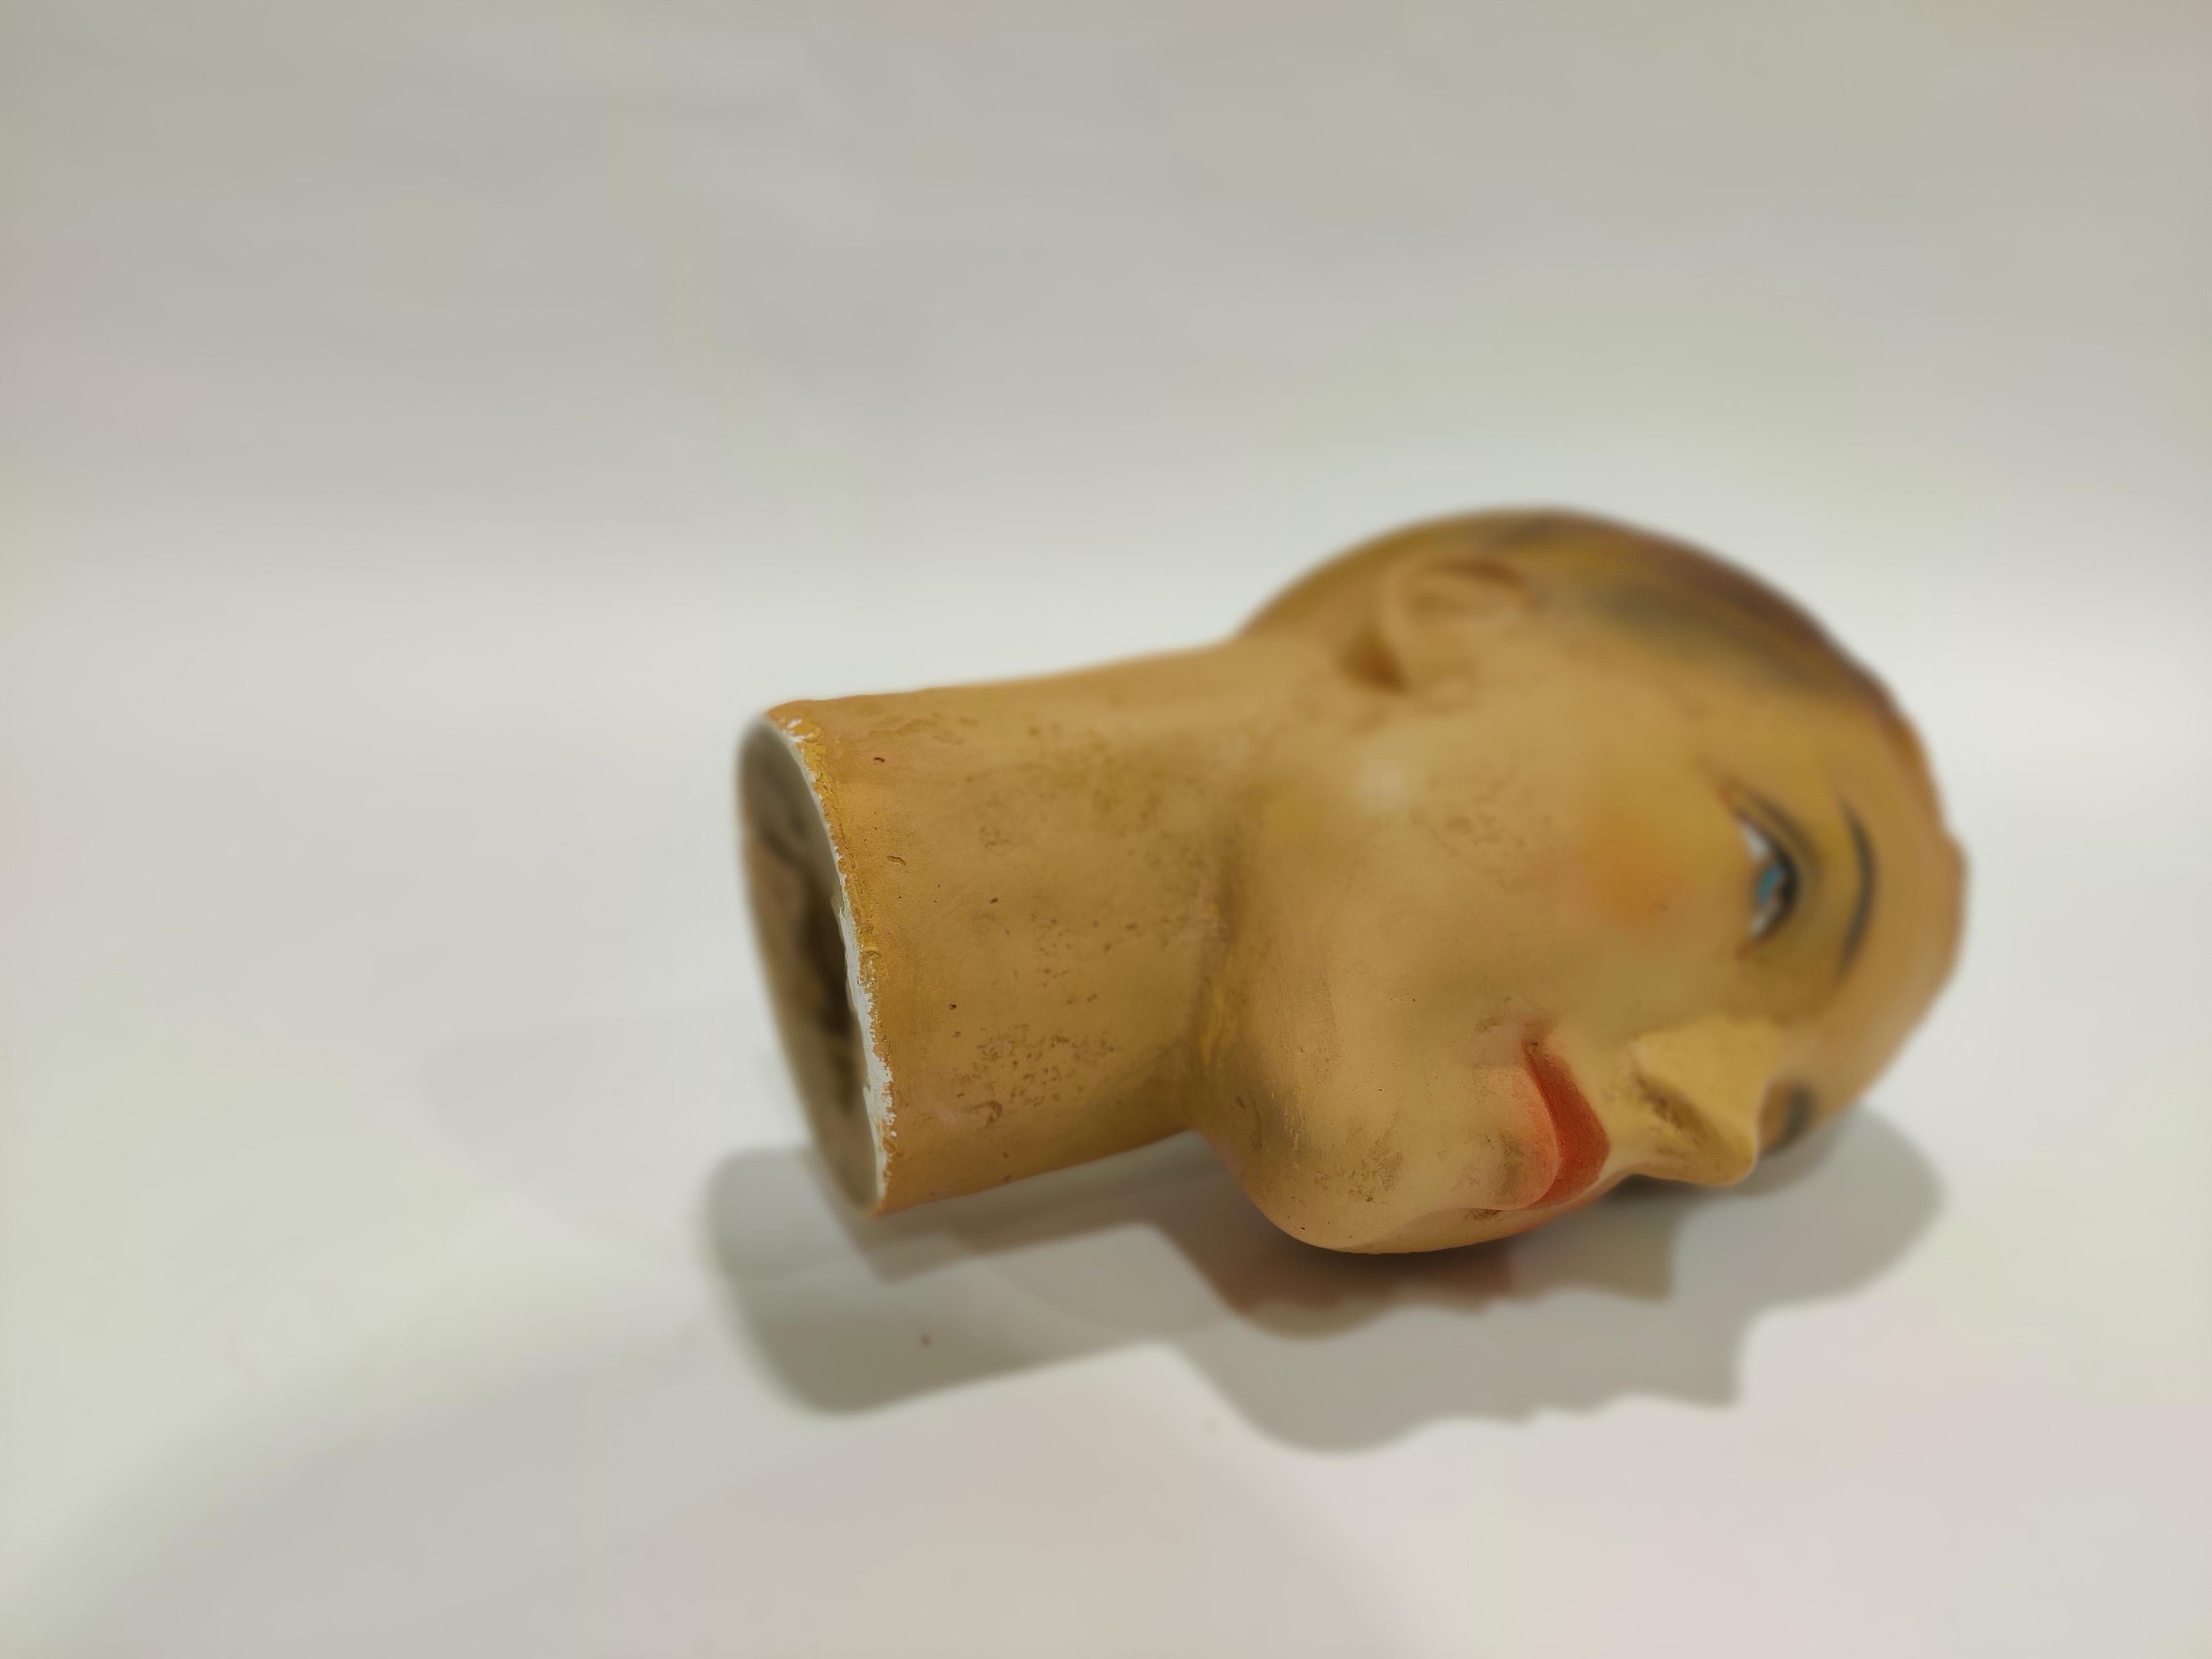 Beautiful male mannequin head made from plaster. 

It has some minor user traces.

Comes from a lot acquired from a clothes shop that stopped activities.

Great decorative item to display glasses, hats.

France, 1960s

Measures: Height